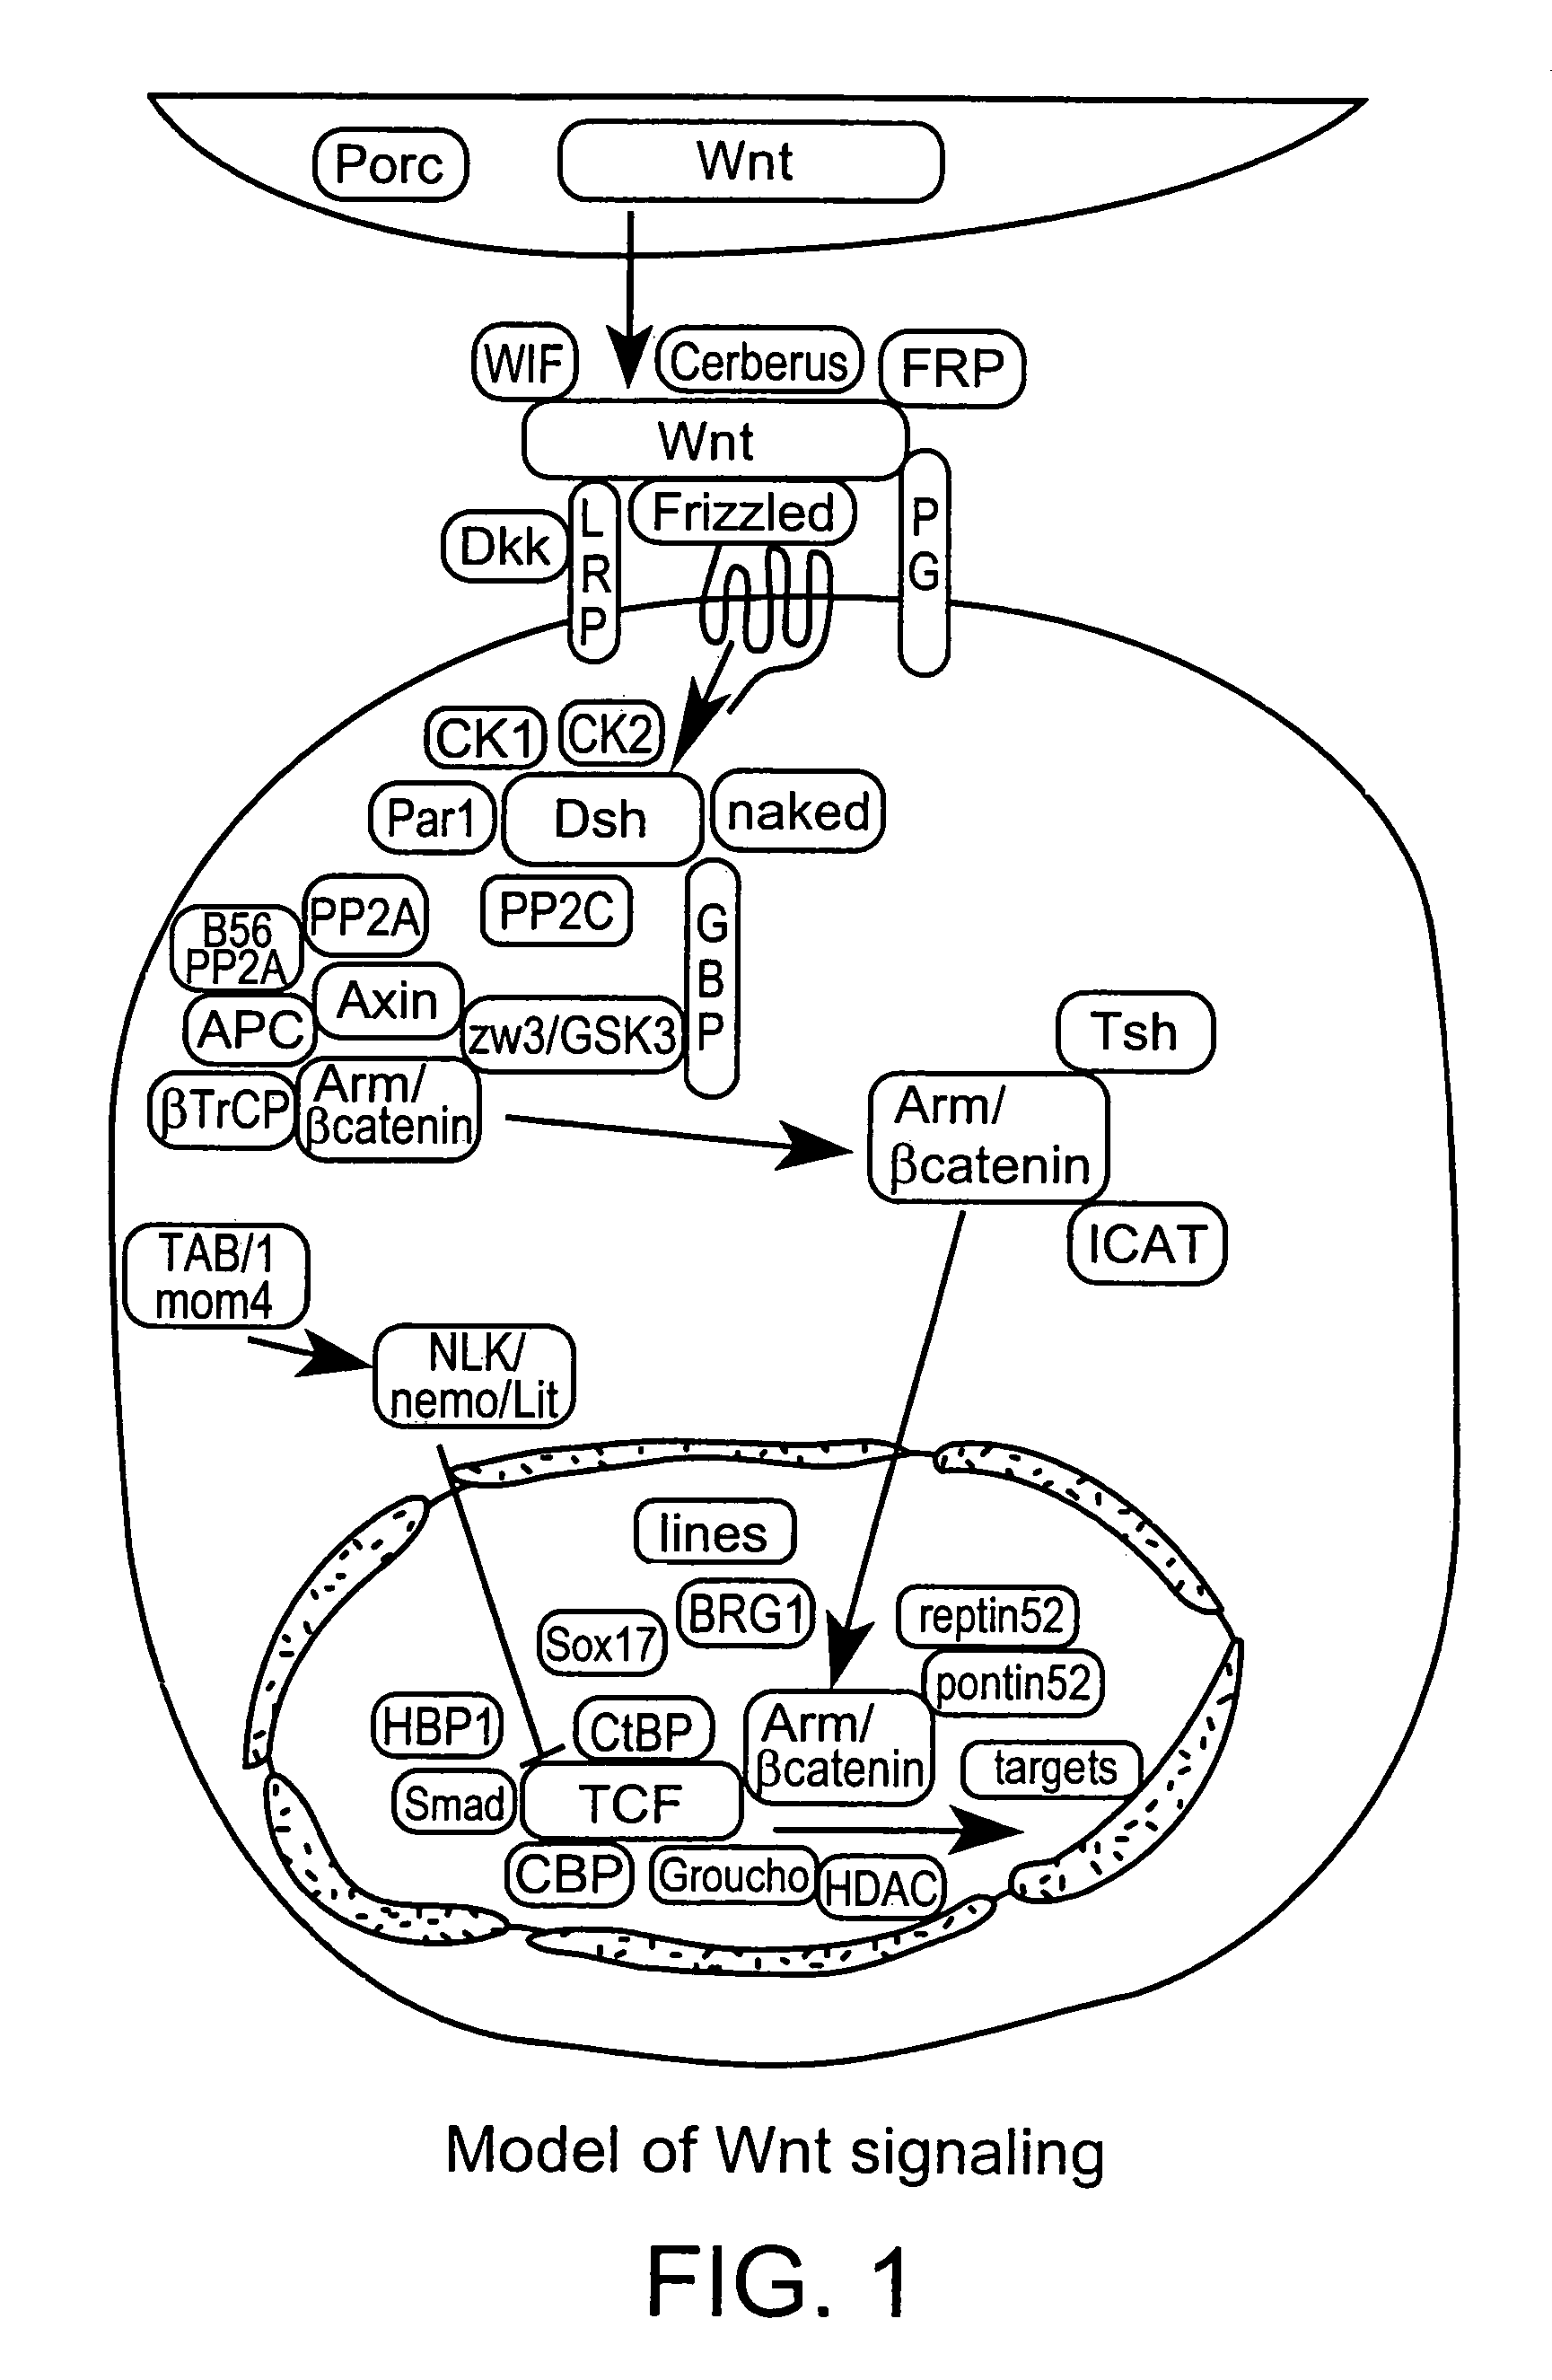 Reagents and method for modulating Dkk-mediated interactions